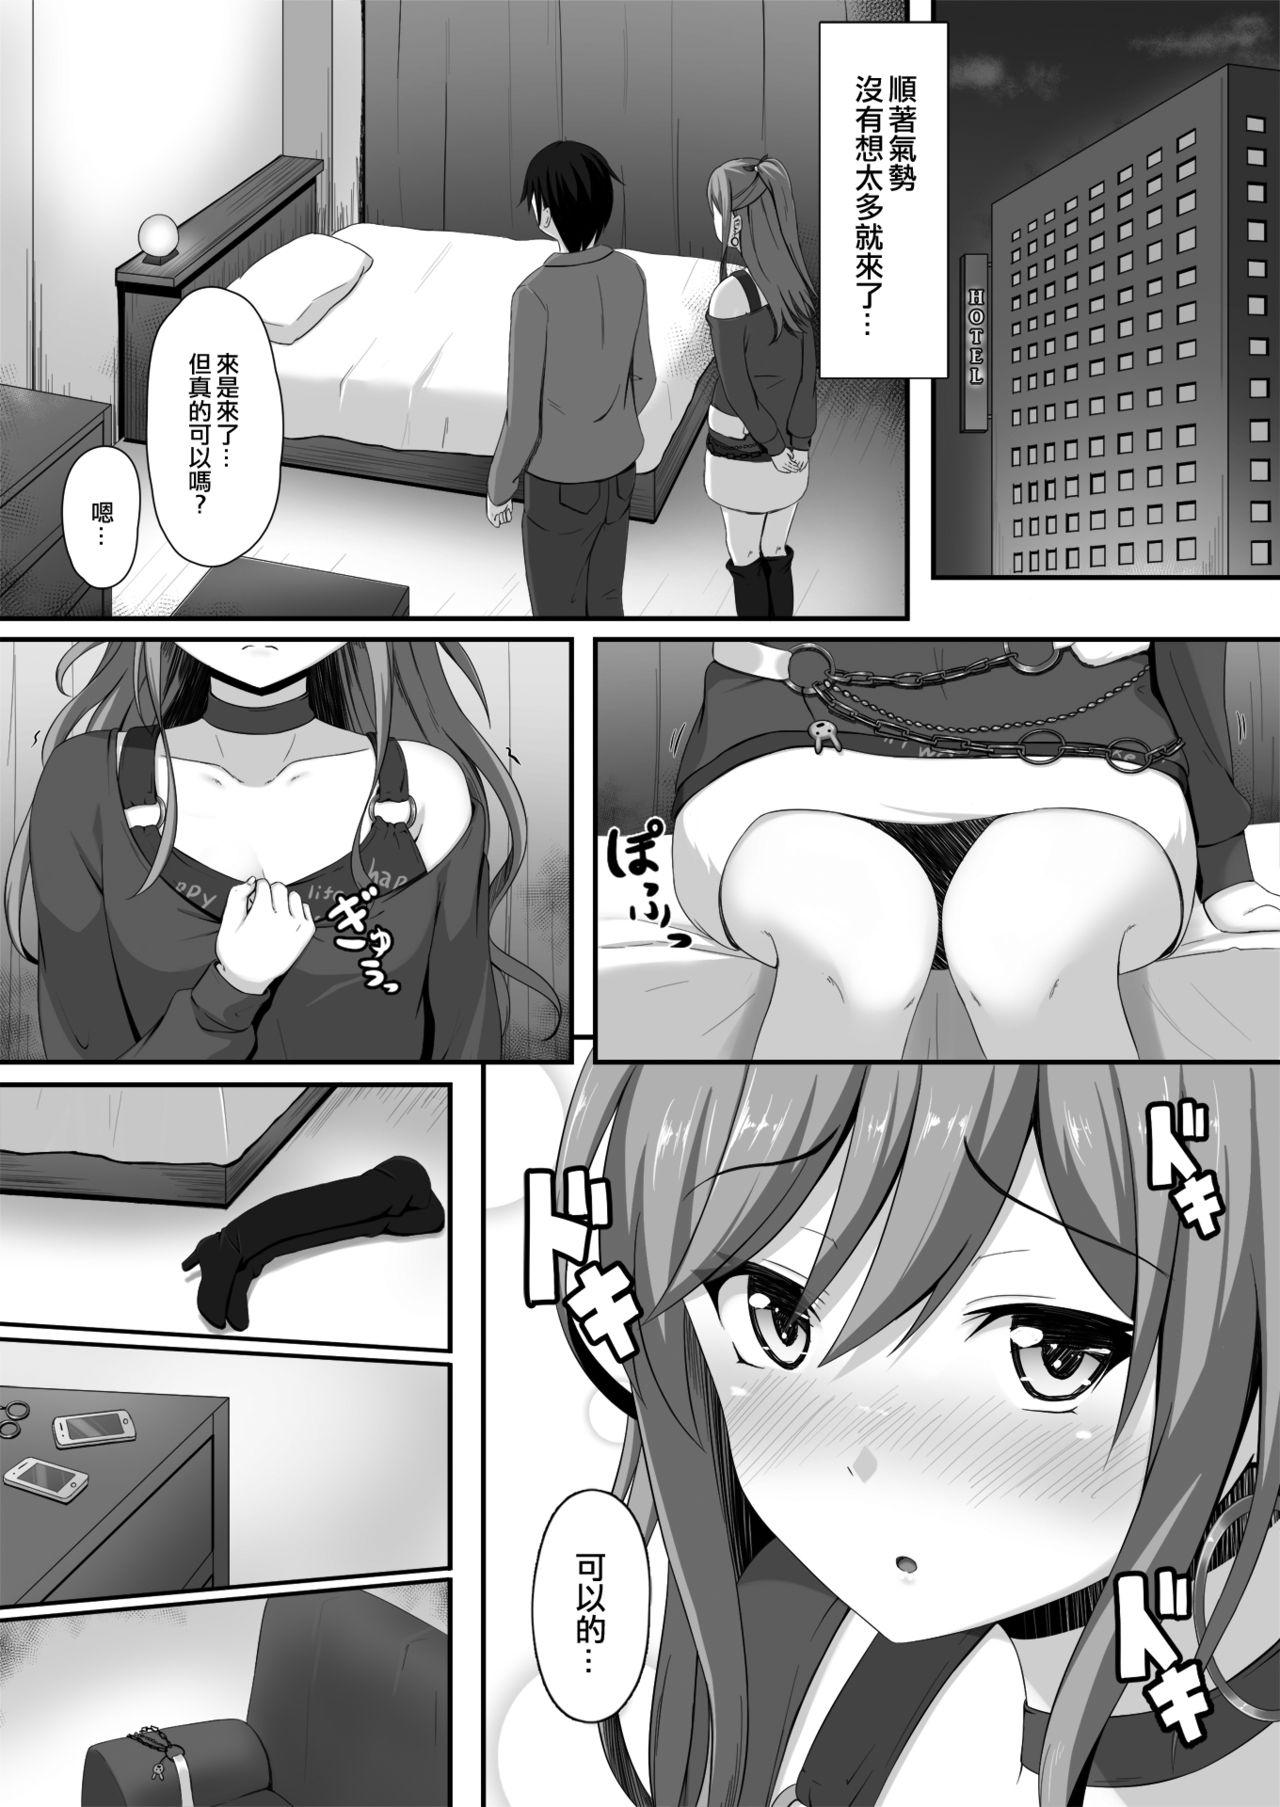 Messy Route Episode in Lisa Nee | Route Episode in 莉莎姊 - Bang dream Calle - Page 9